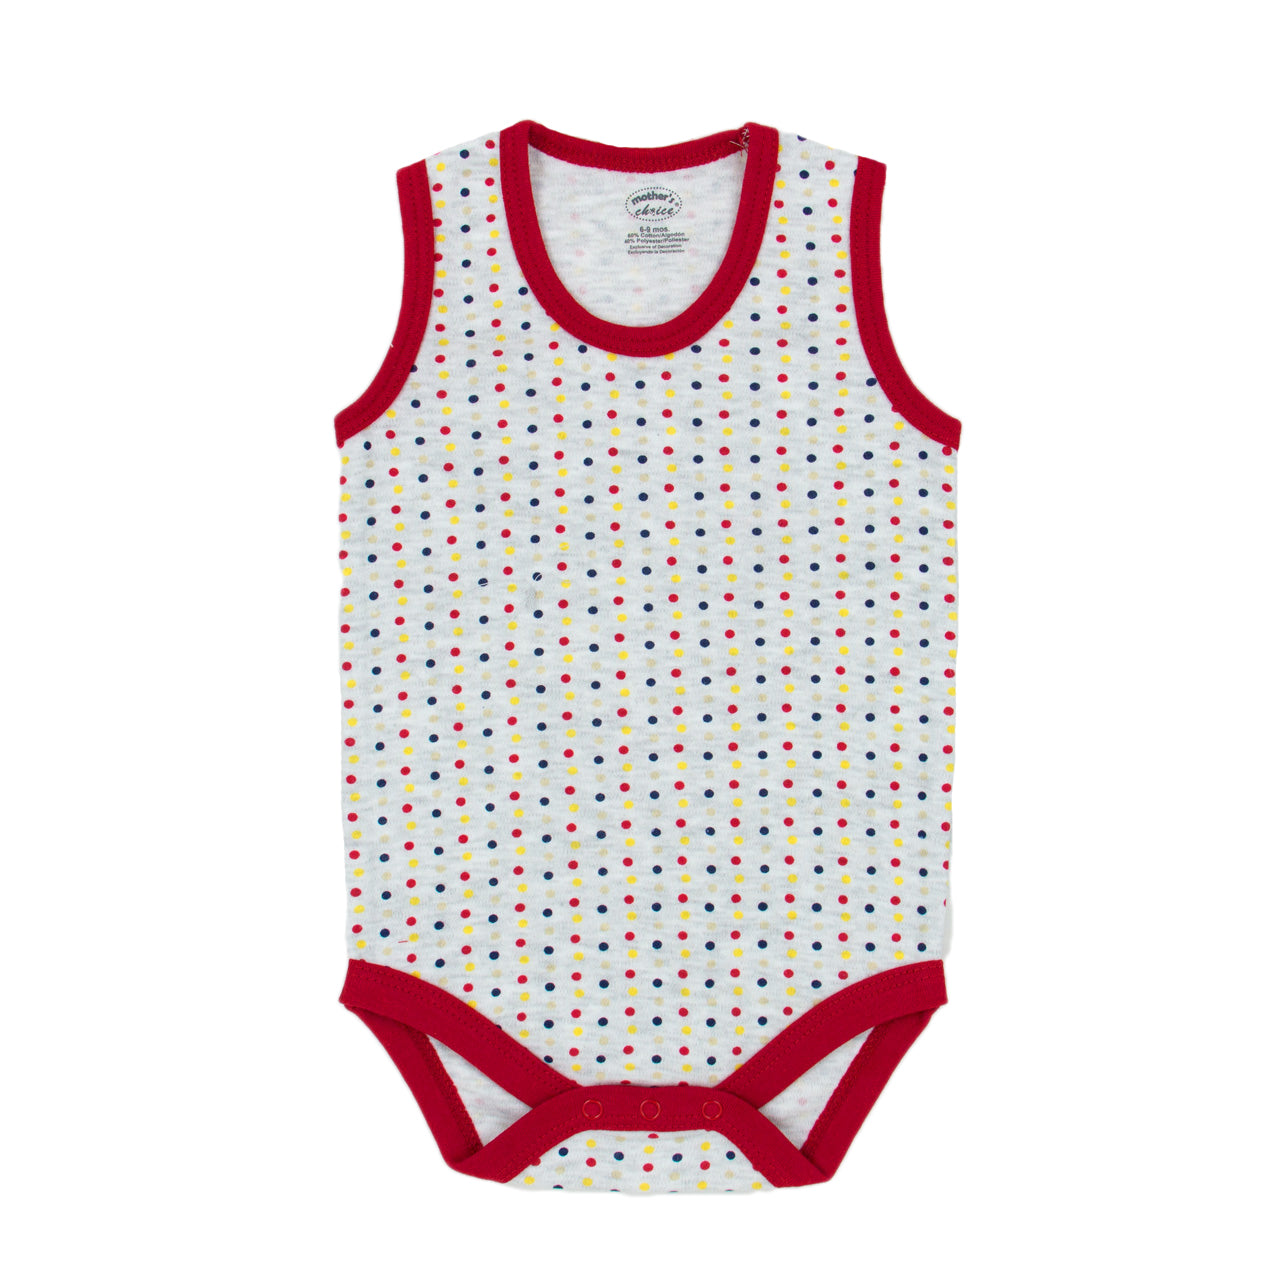 Mother's Choice 3 Pack Sleeveless Onesie (Sweet Racoon/IT2357)